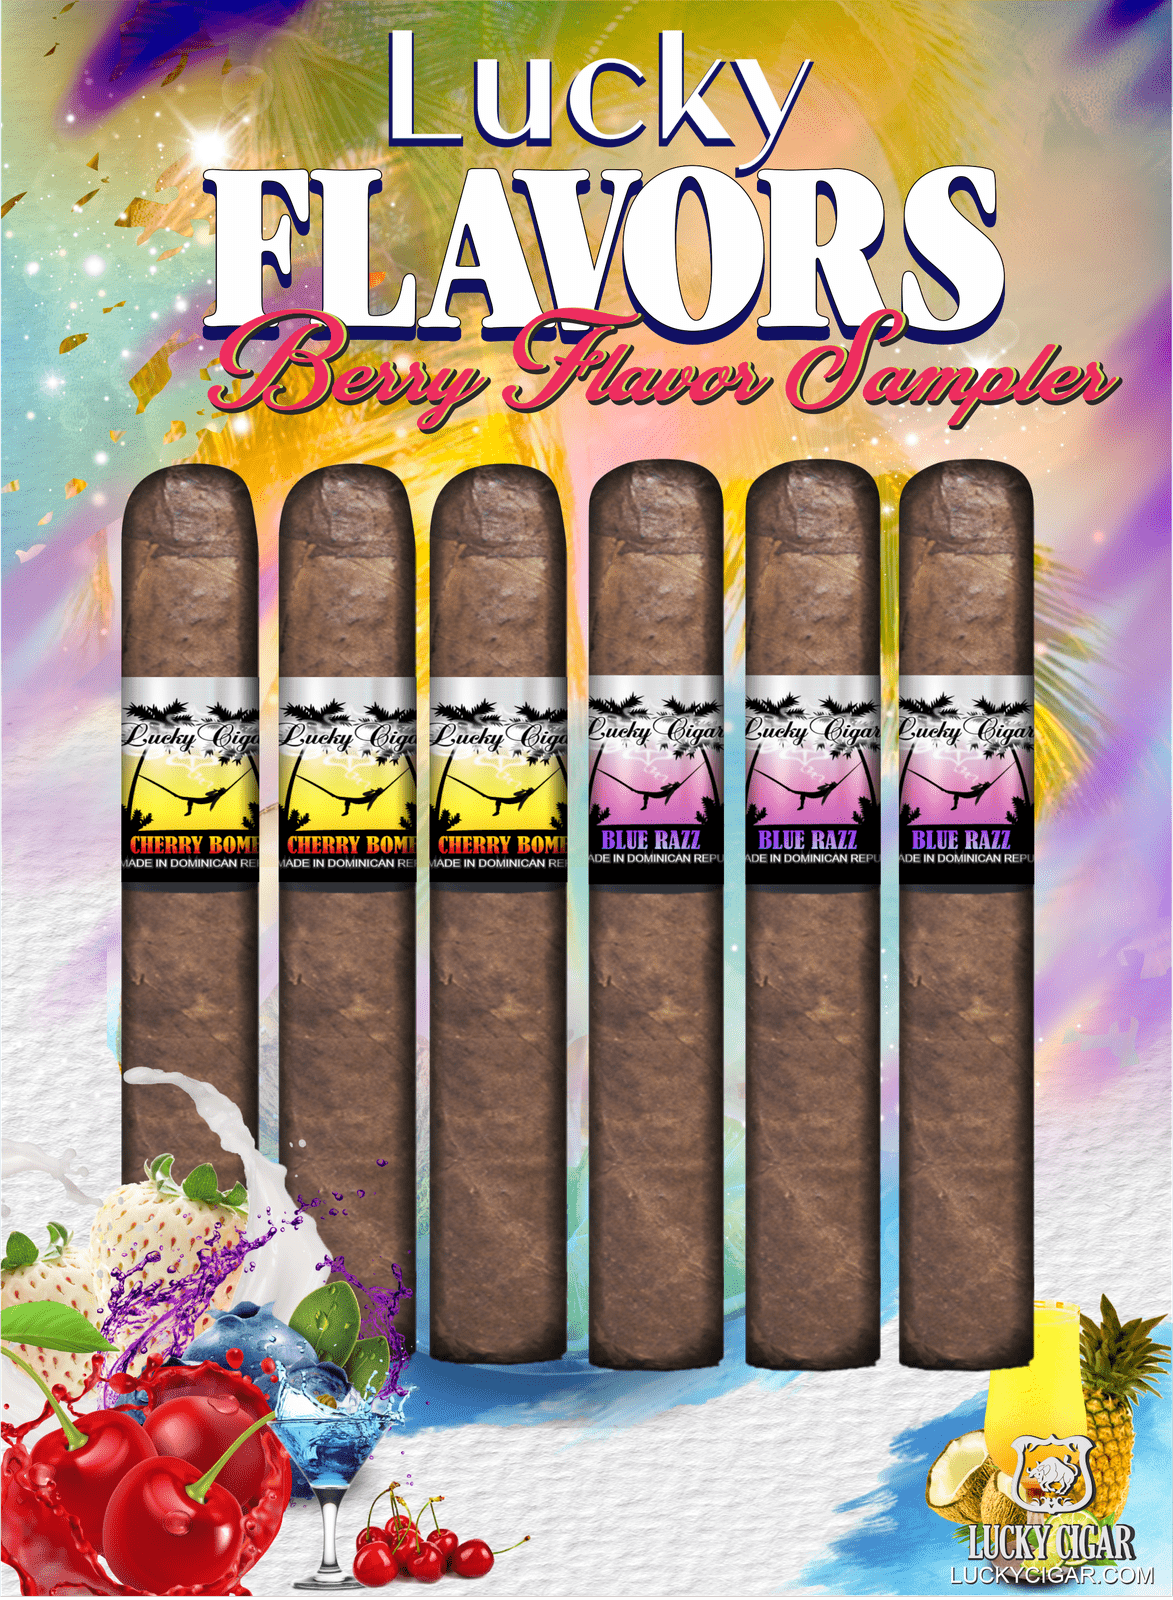 Flavored Cigars: Lucky Flavors 6 Piece Berry Fruit Sampler - Cherry Bomb, Blue Razz